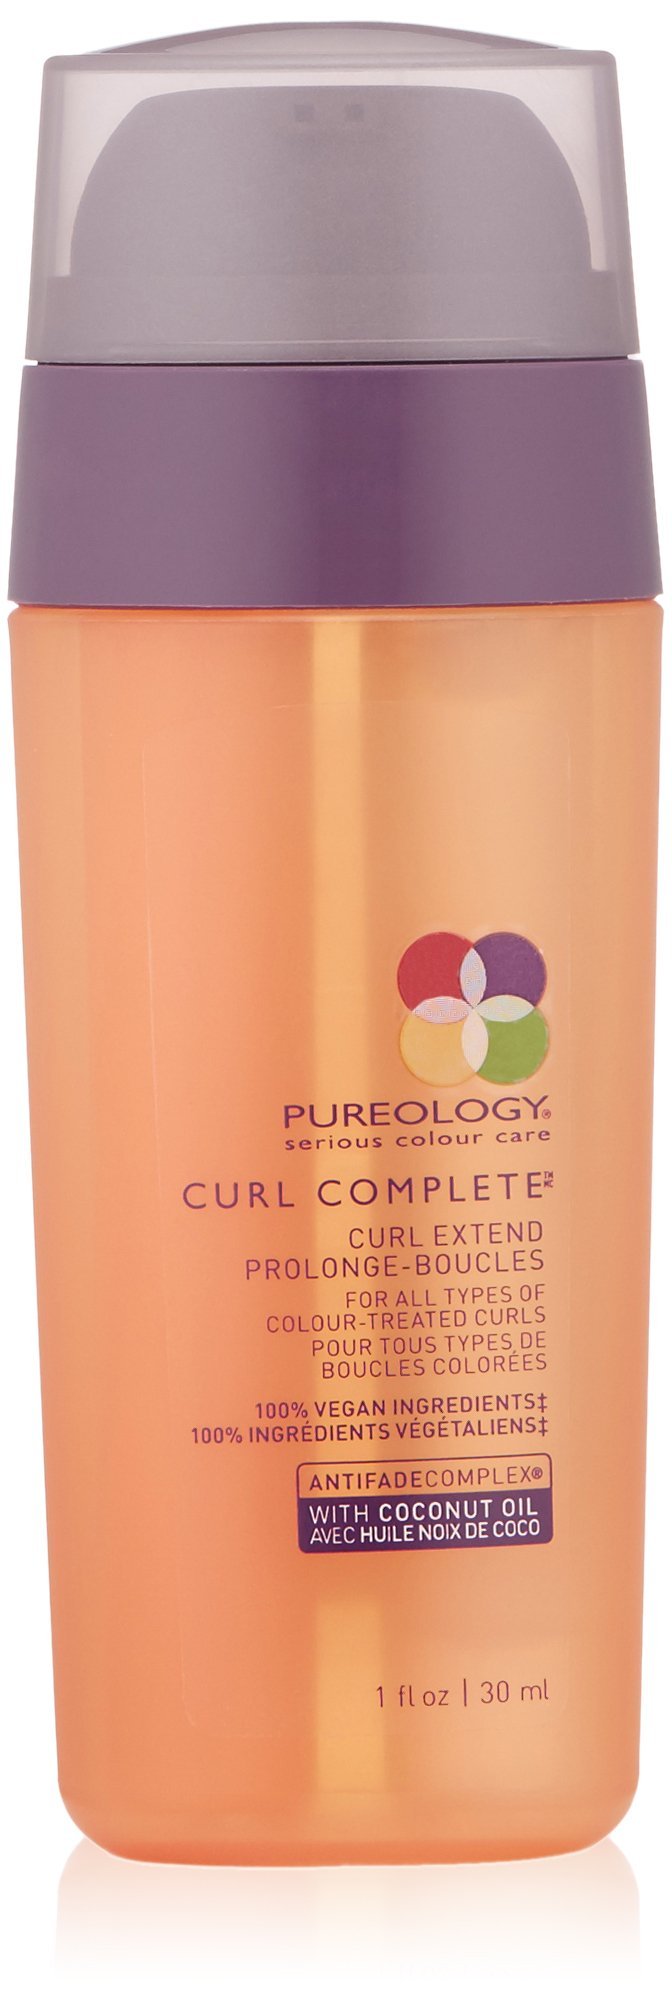 Pureology Curl Complete Curl Extend Treatment Styler, 1 oz.